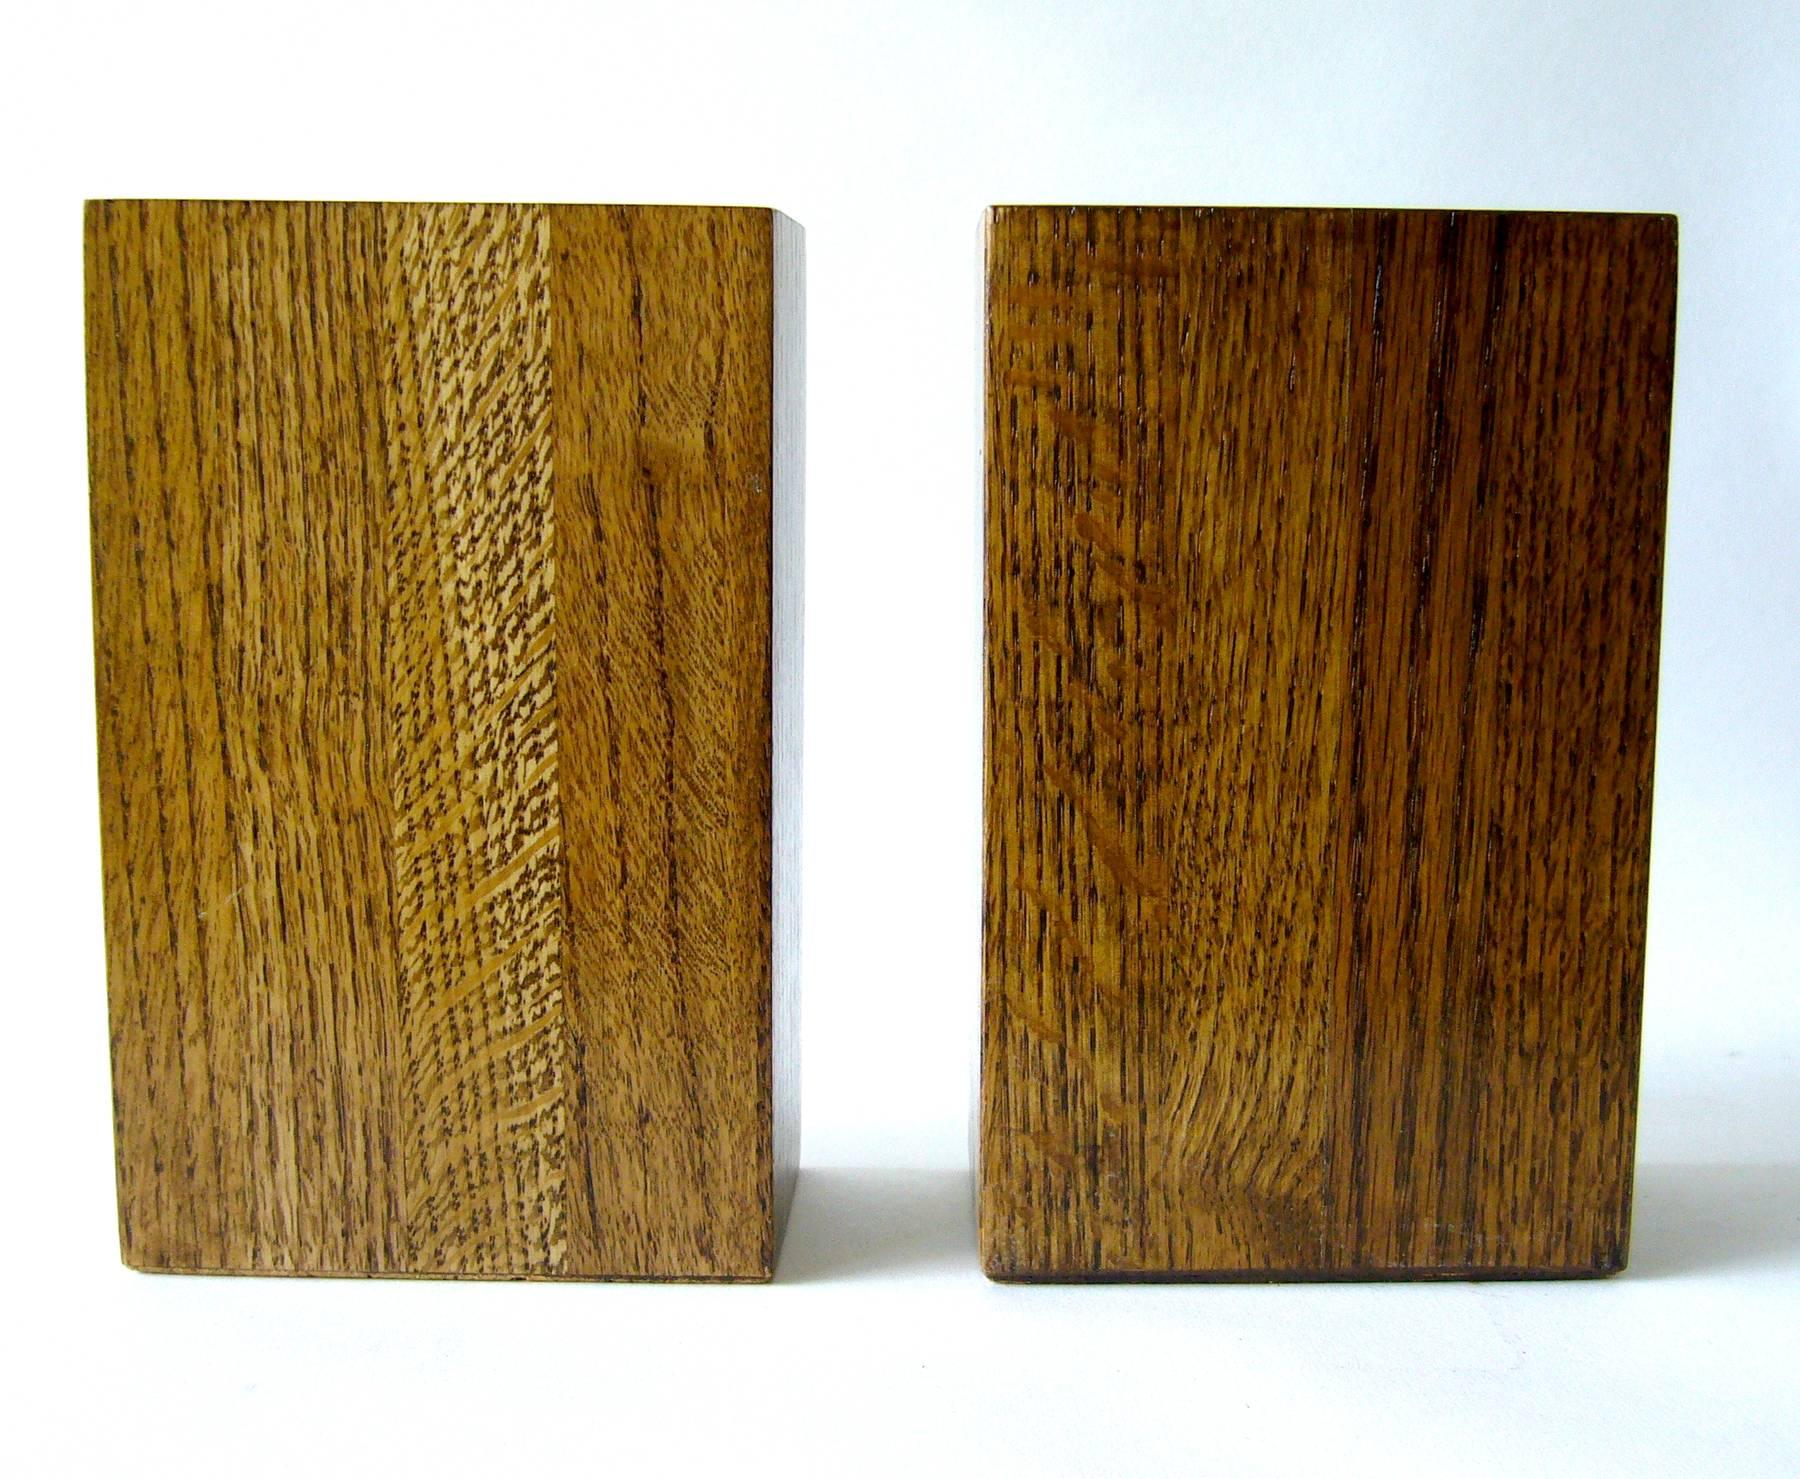 Enamel and wood bookends with cork bottoms created by Anne Marie Davidson of Sierra Madre, California. Bookends measure 7.25